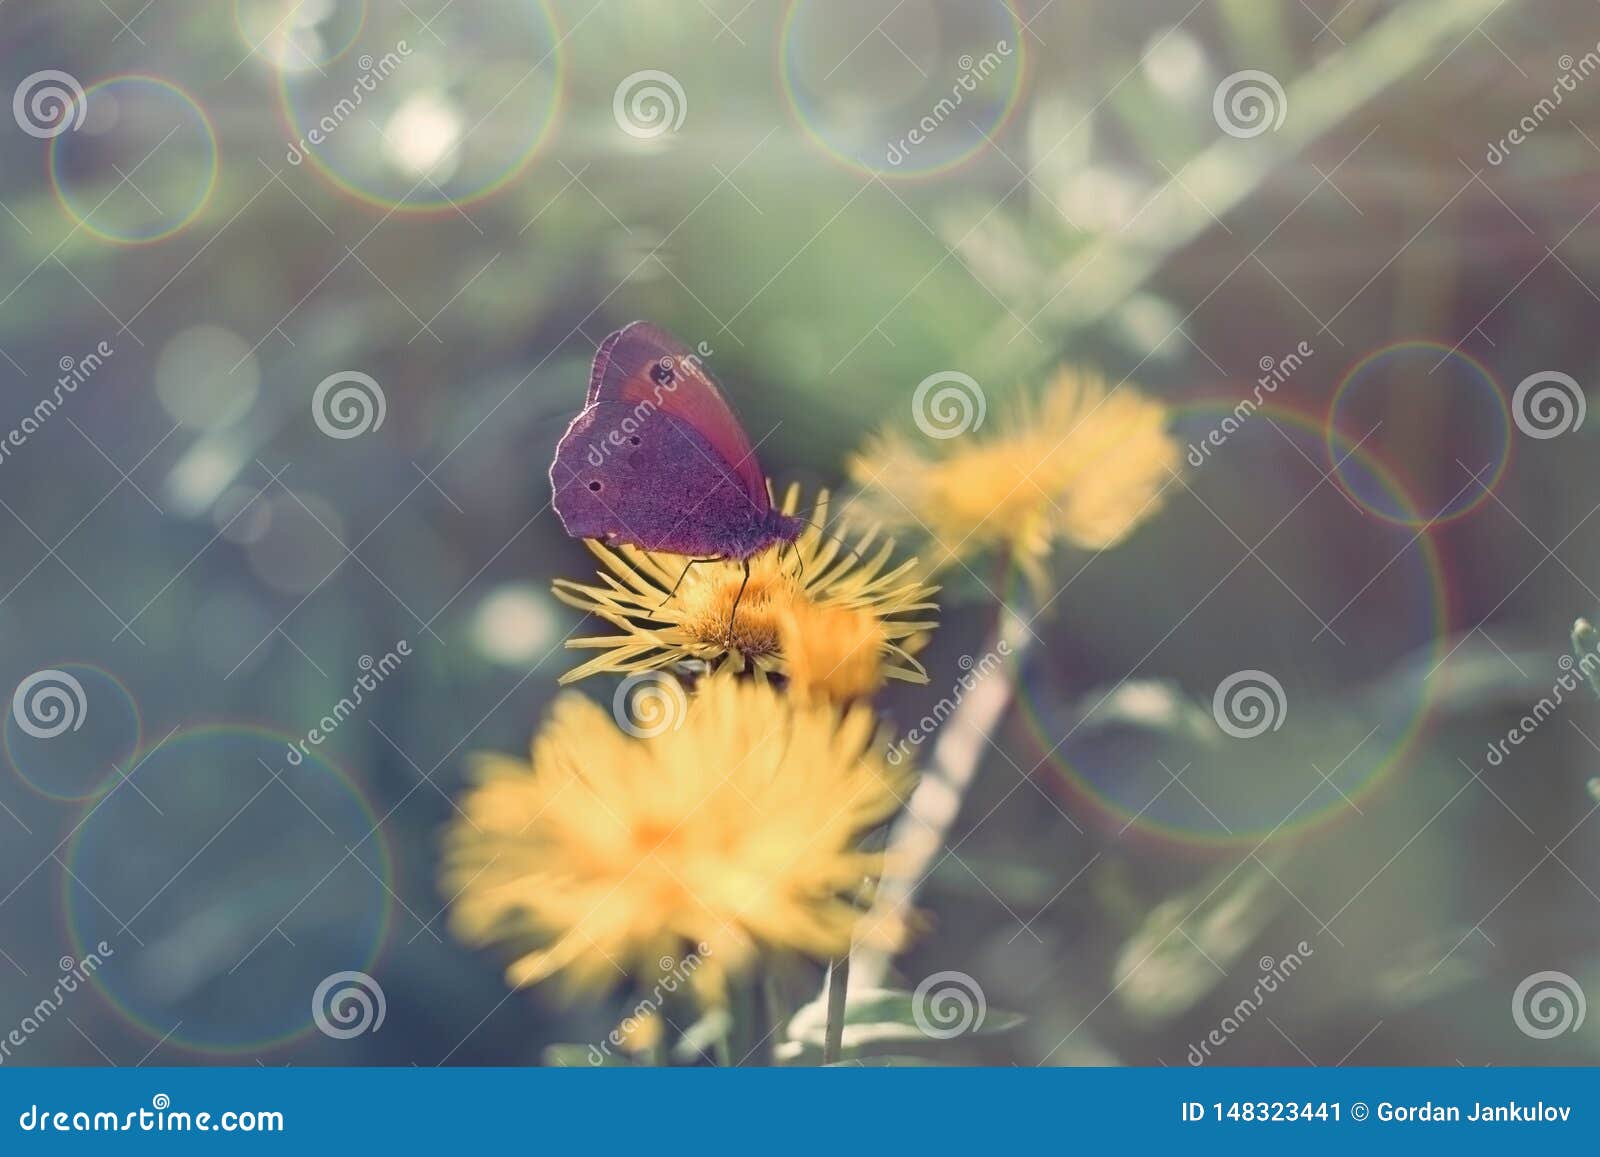 butterfly on yellow flower, purple butterfly colecting polen and nectar